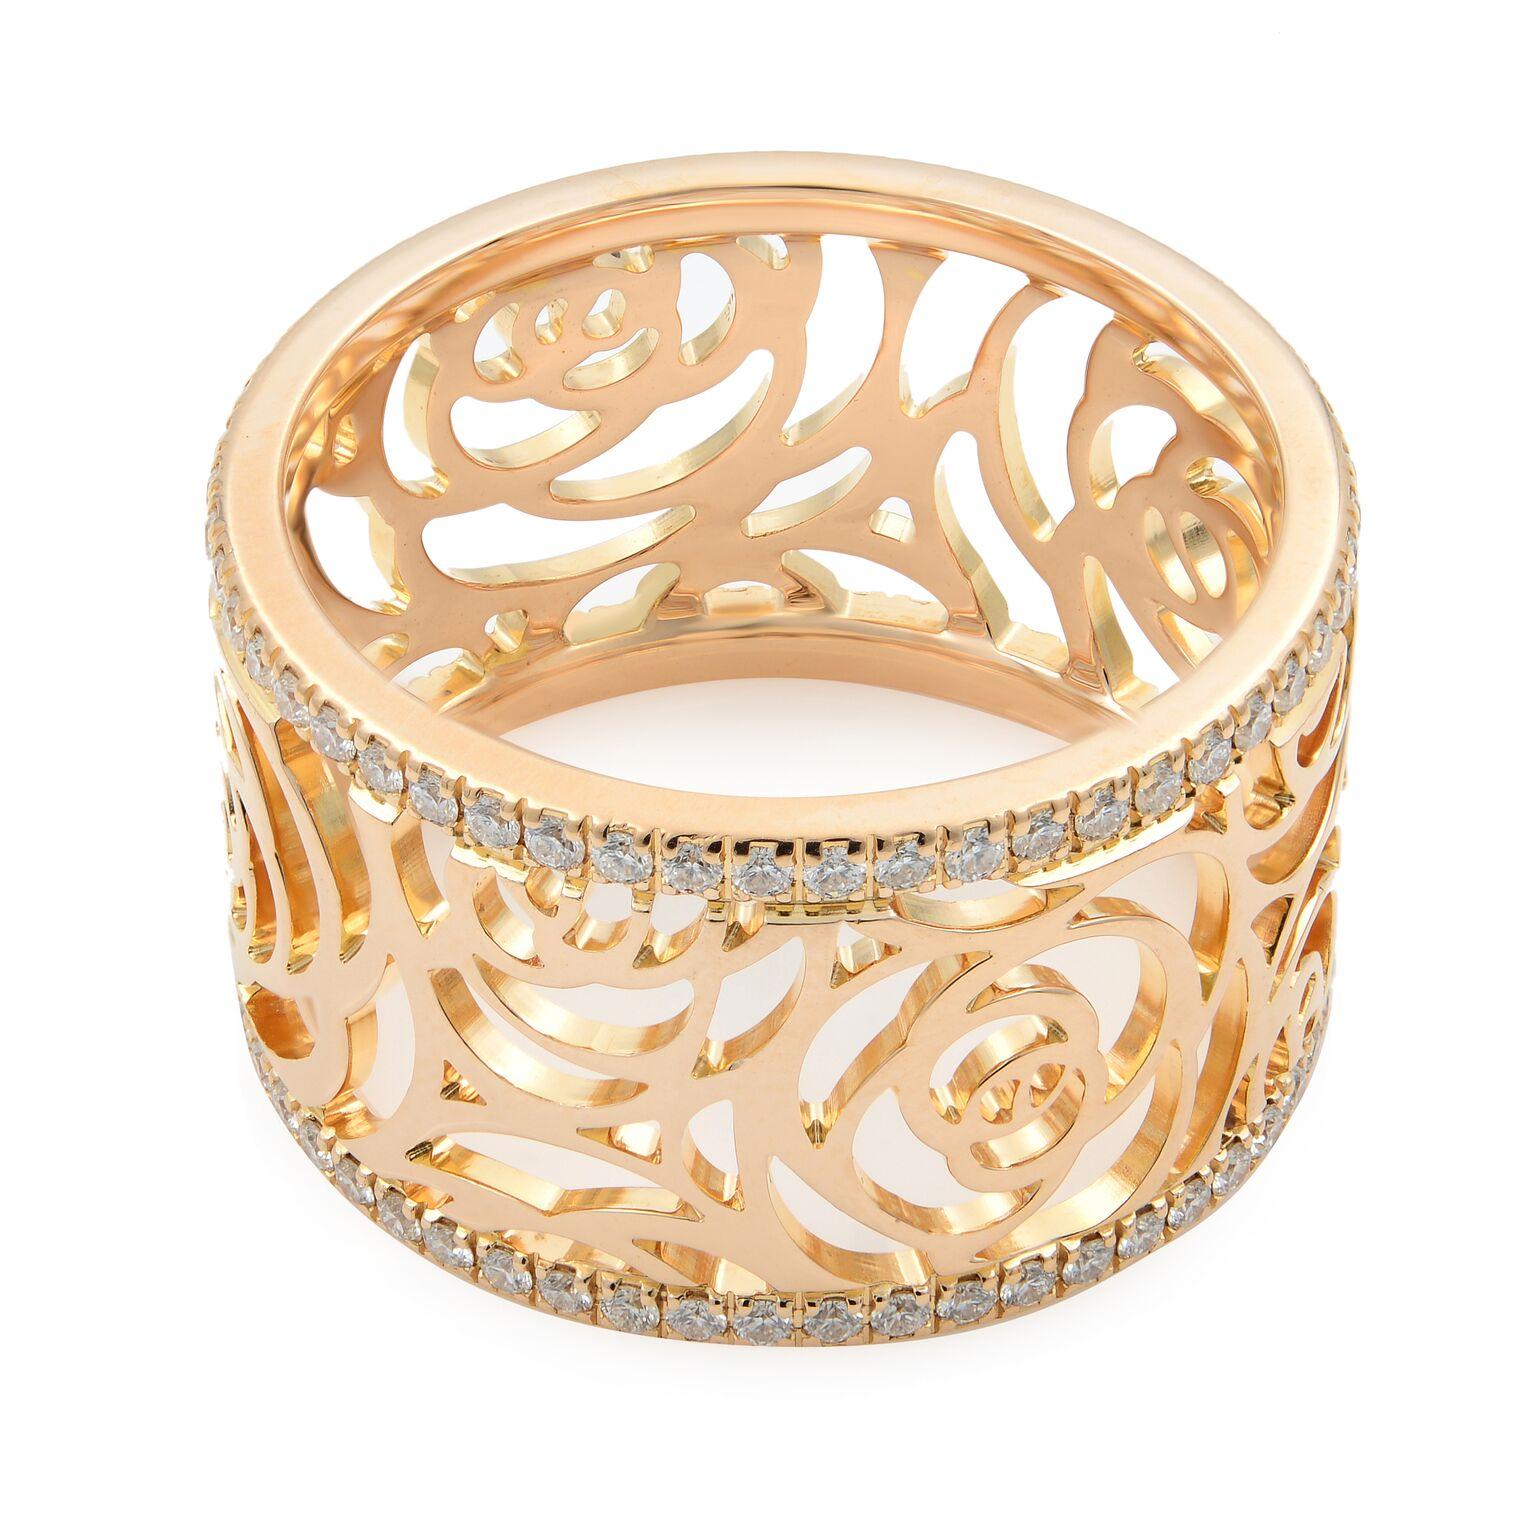 This is a Chanel Camelia ring in the larger version of this luminous band. Made in 18k rose gold with the brand's famous flower motif around the ring, this wide band is lined on top and bottom with a single row of brilliant cut diamonds. Diamond